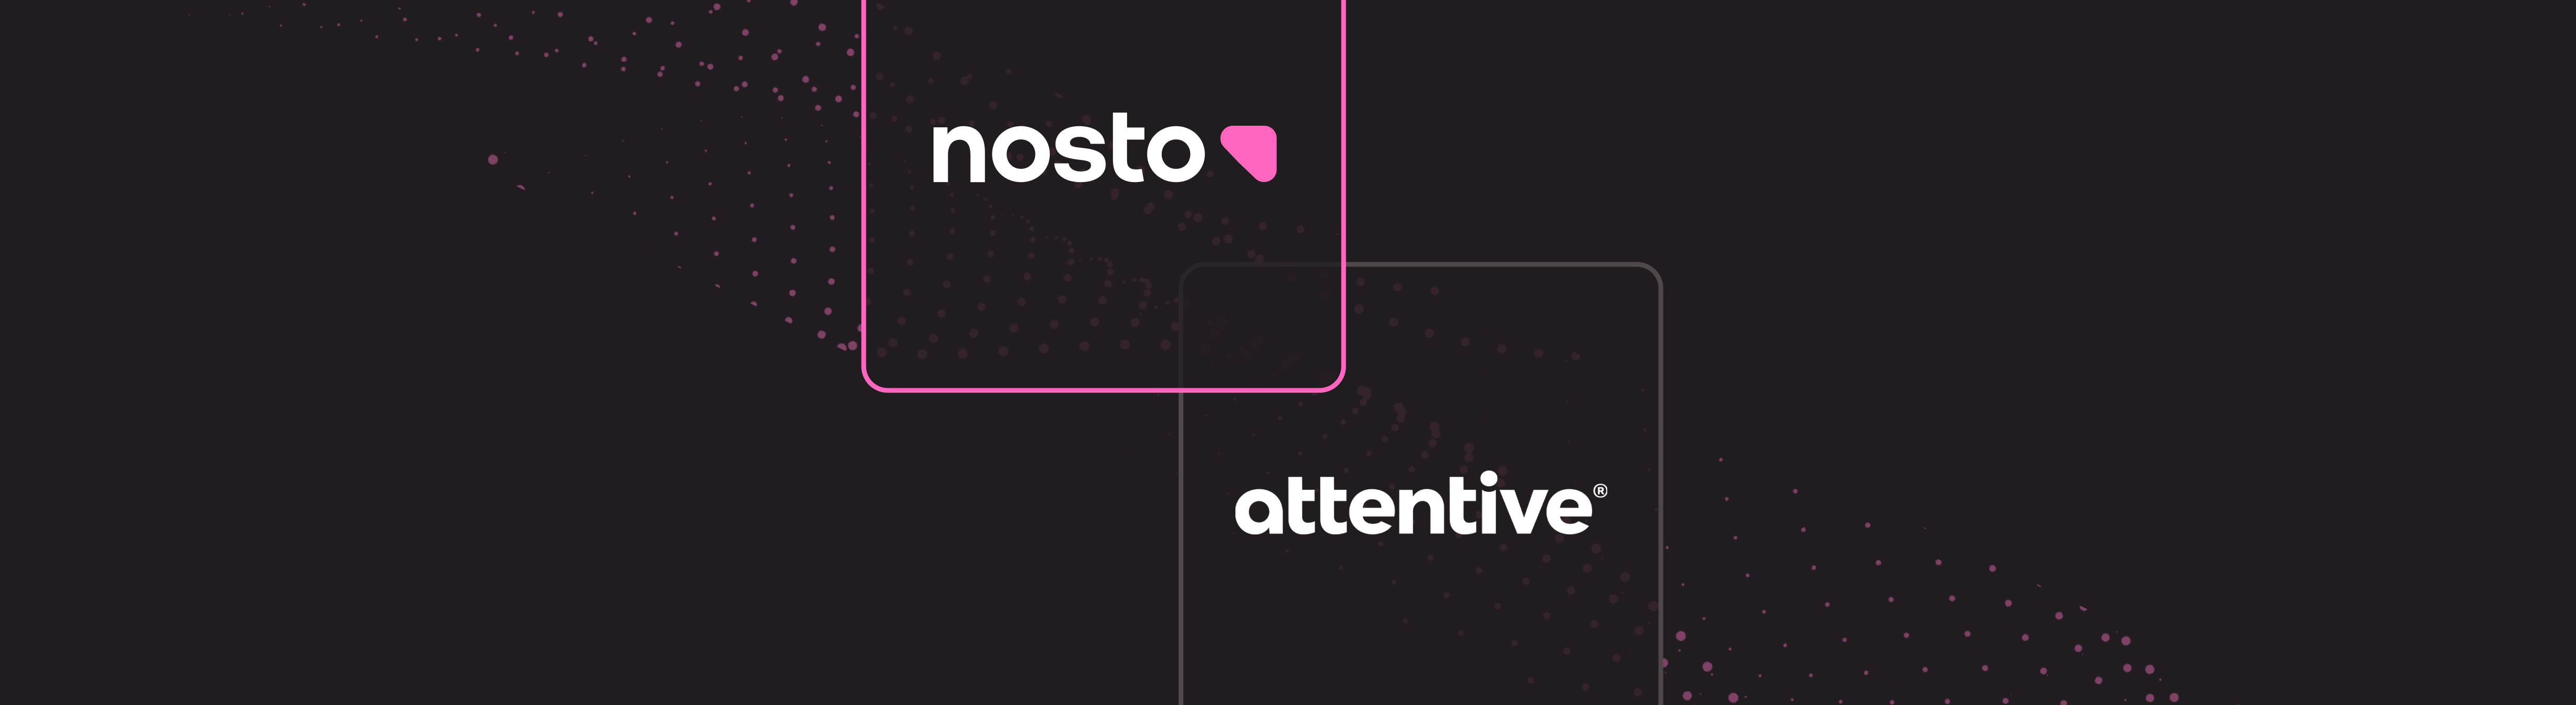 Nosto and Attentive launch new partnership, giving brands power to create personalized commerce experiences for SMS-driven traffic